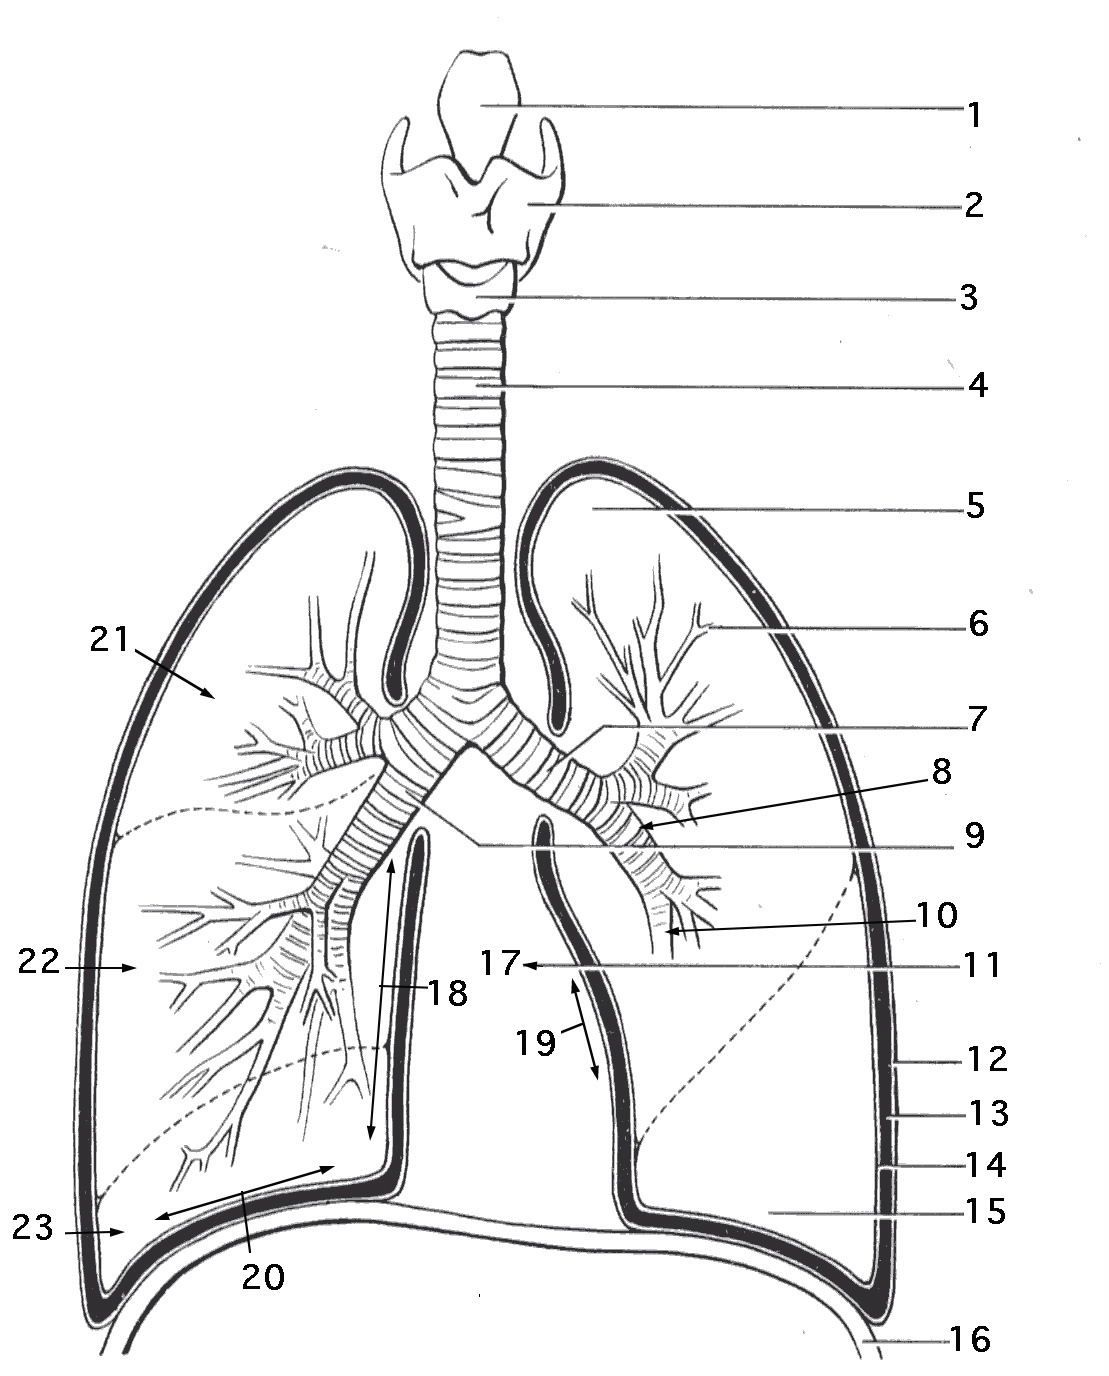 human lungs diagram for kids